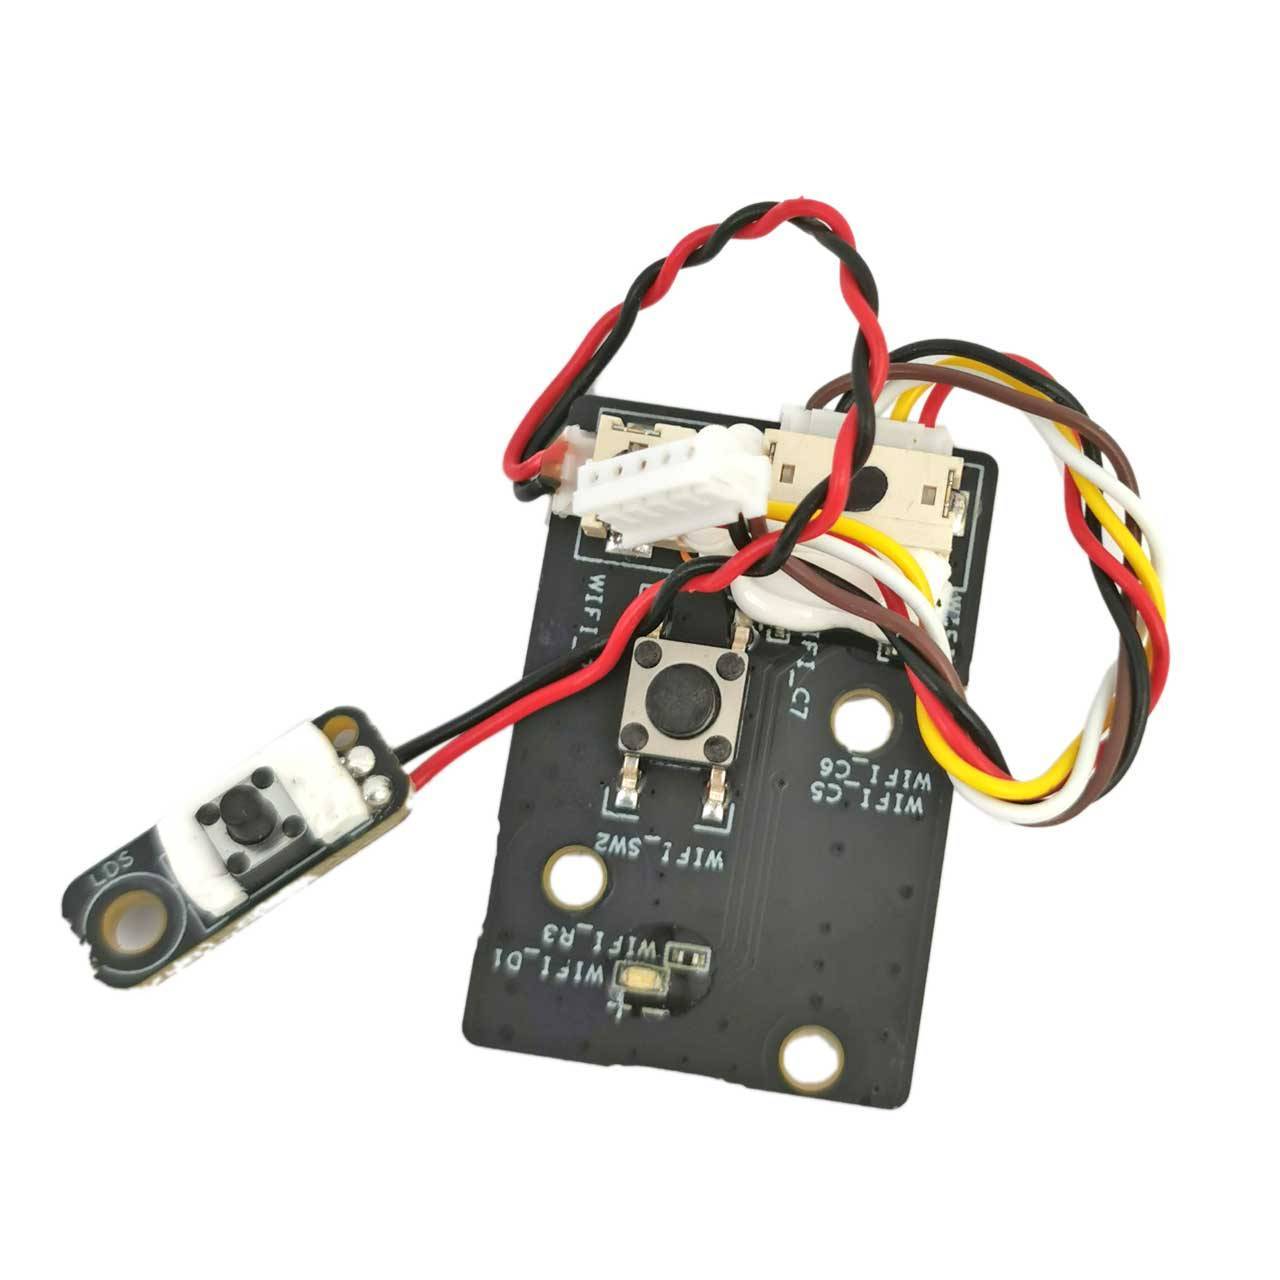 Dreame D9 Max P2137-LED-RESET Board